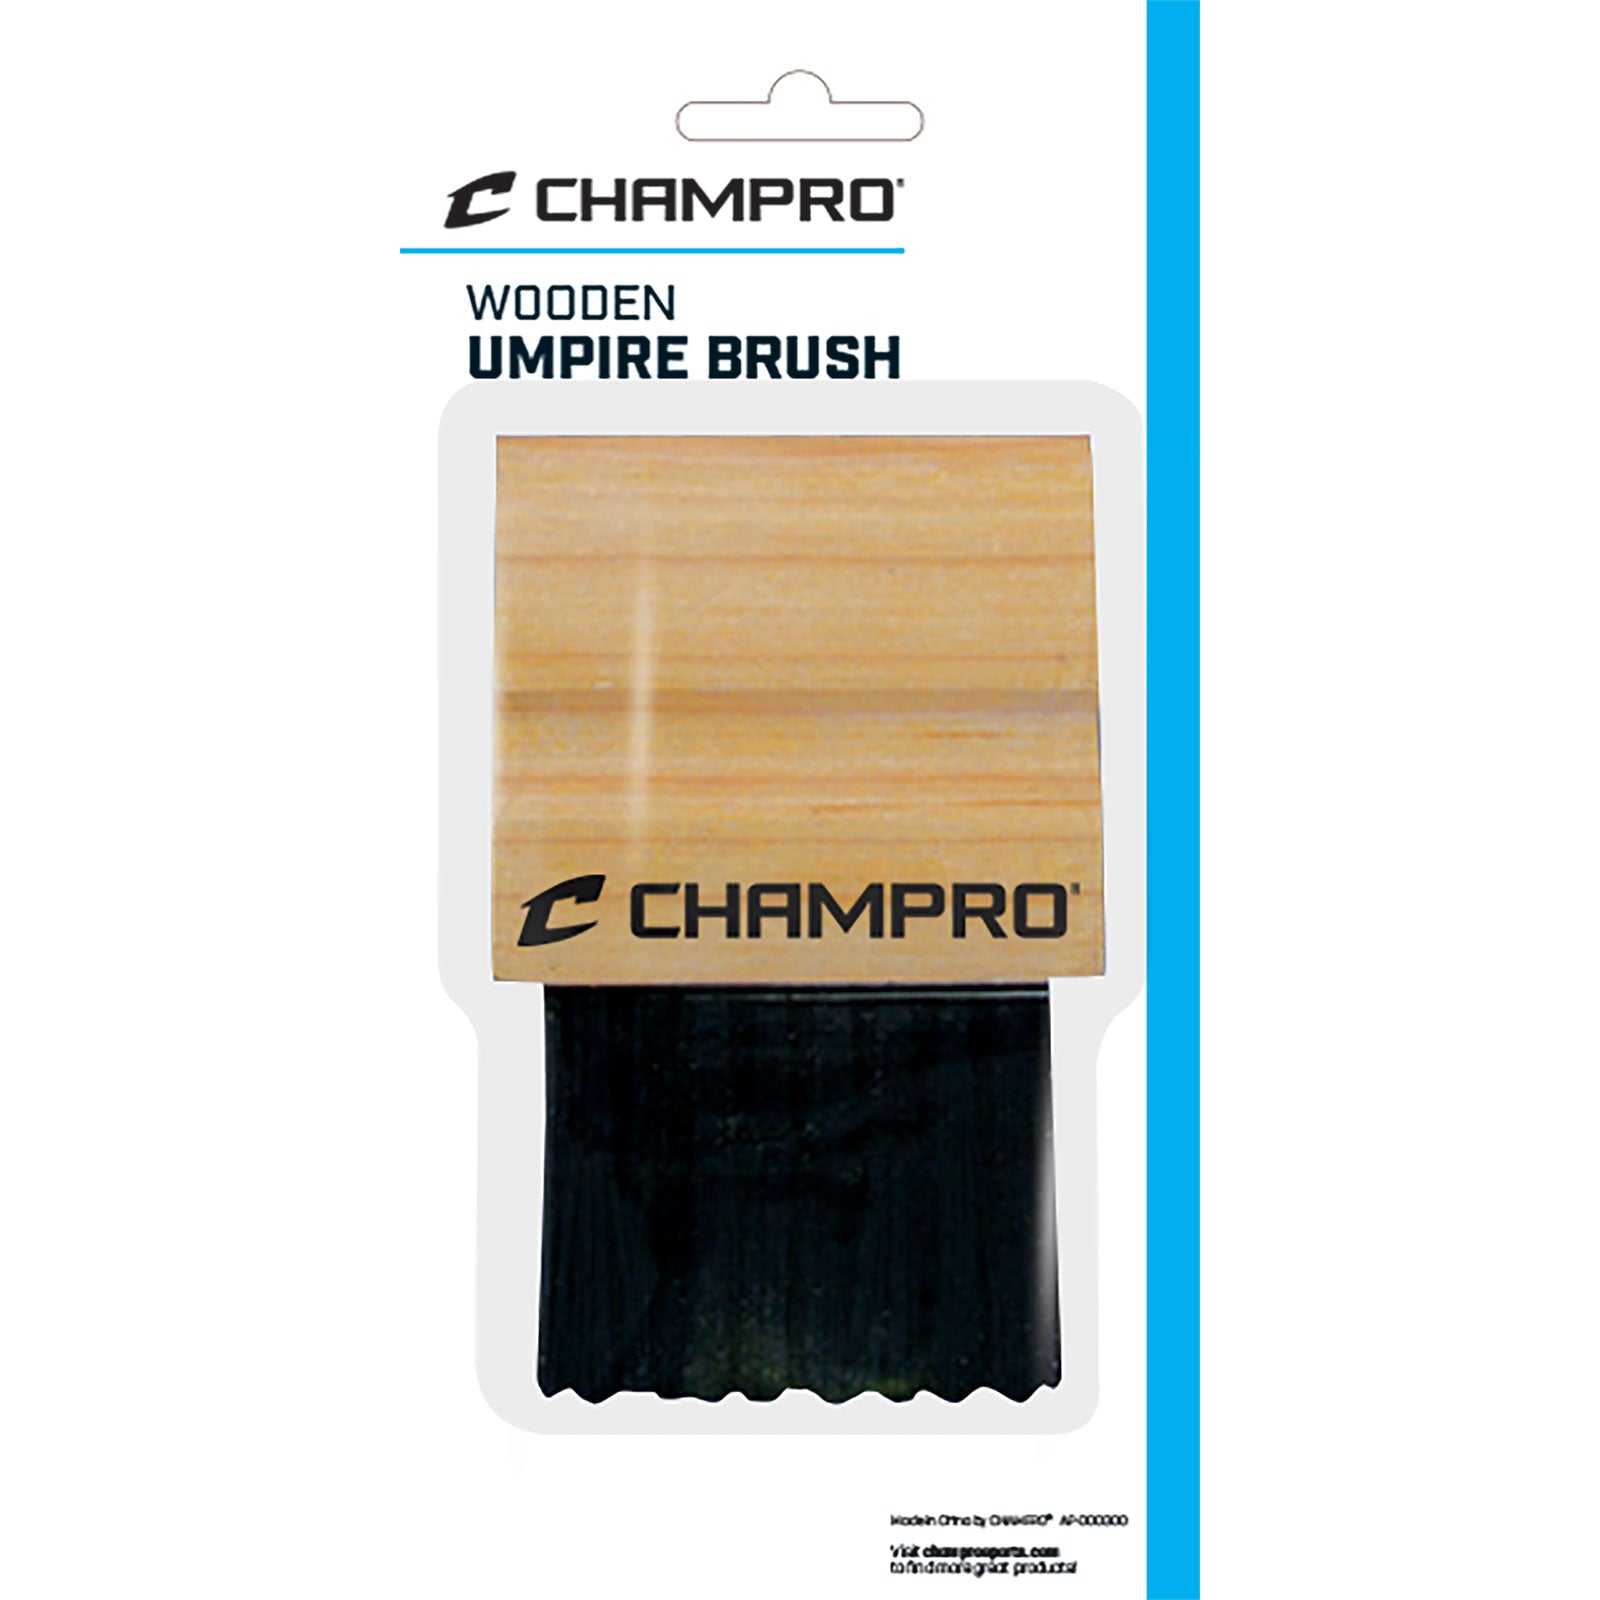 Champro A040 Wooden Umpire Brush Order In Dozens Only - HIT a Double